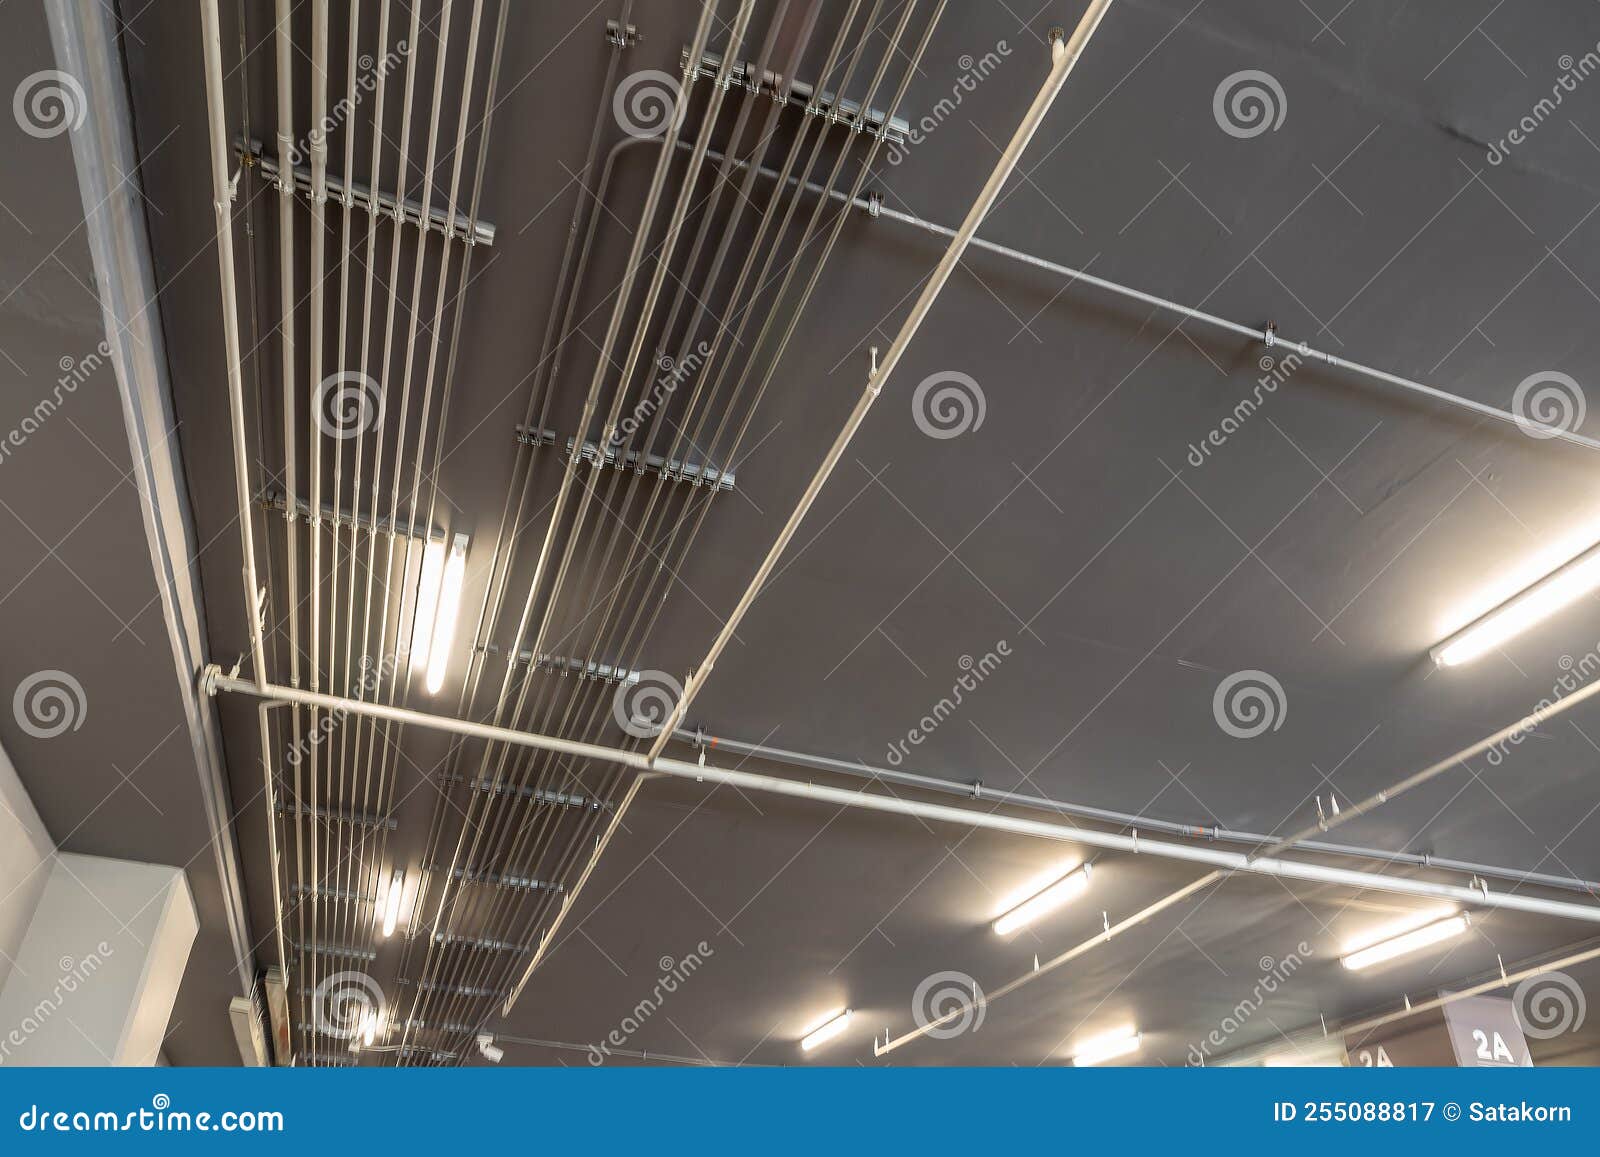 installation of electrical metallic conduits on the ceiling